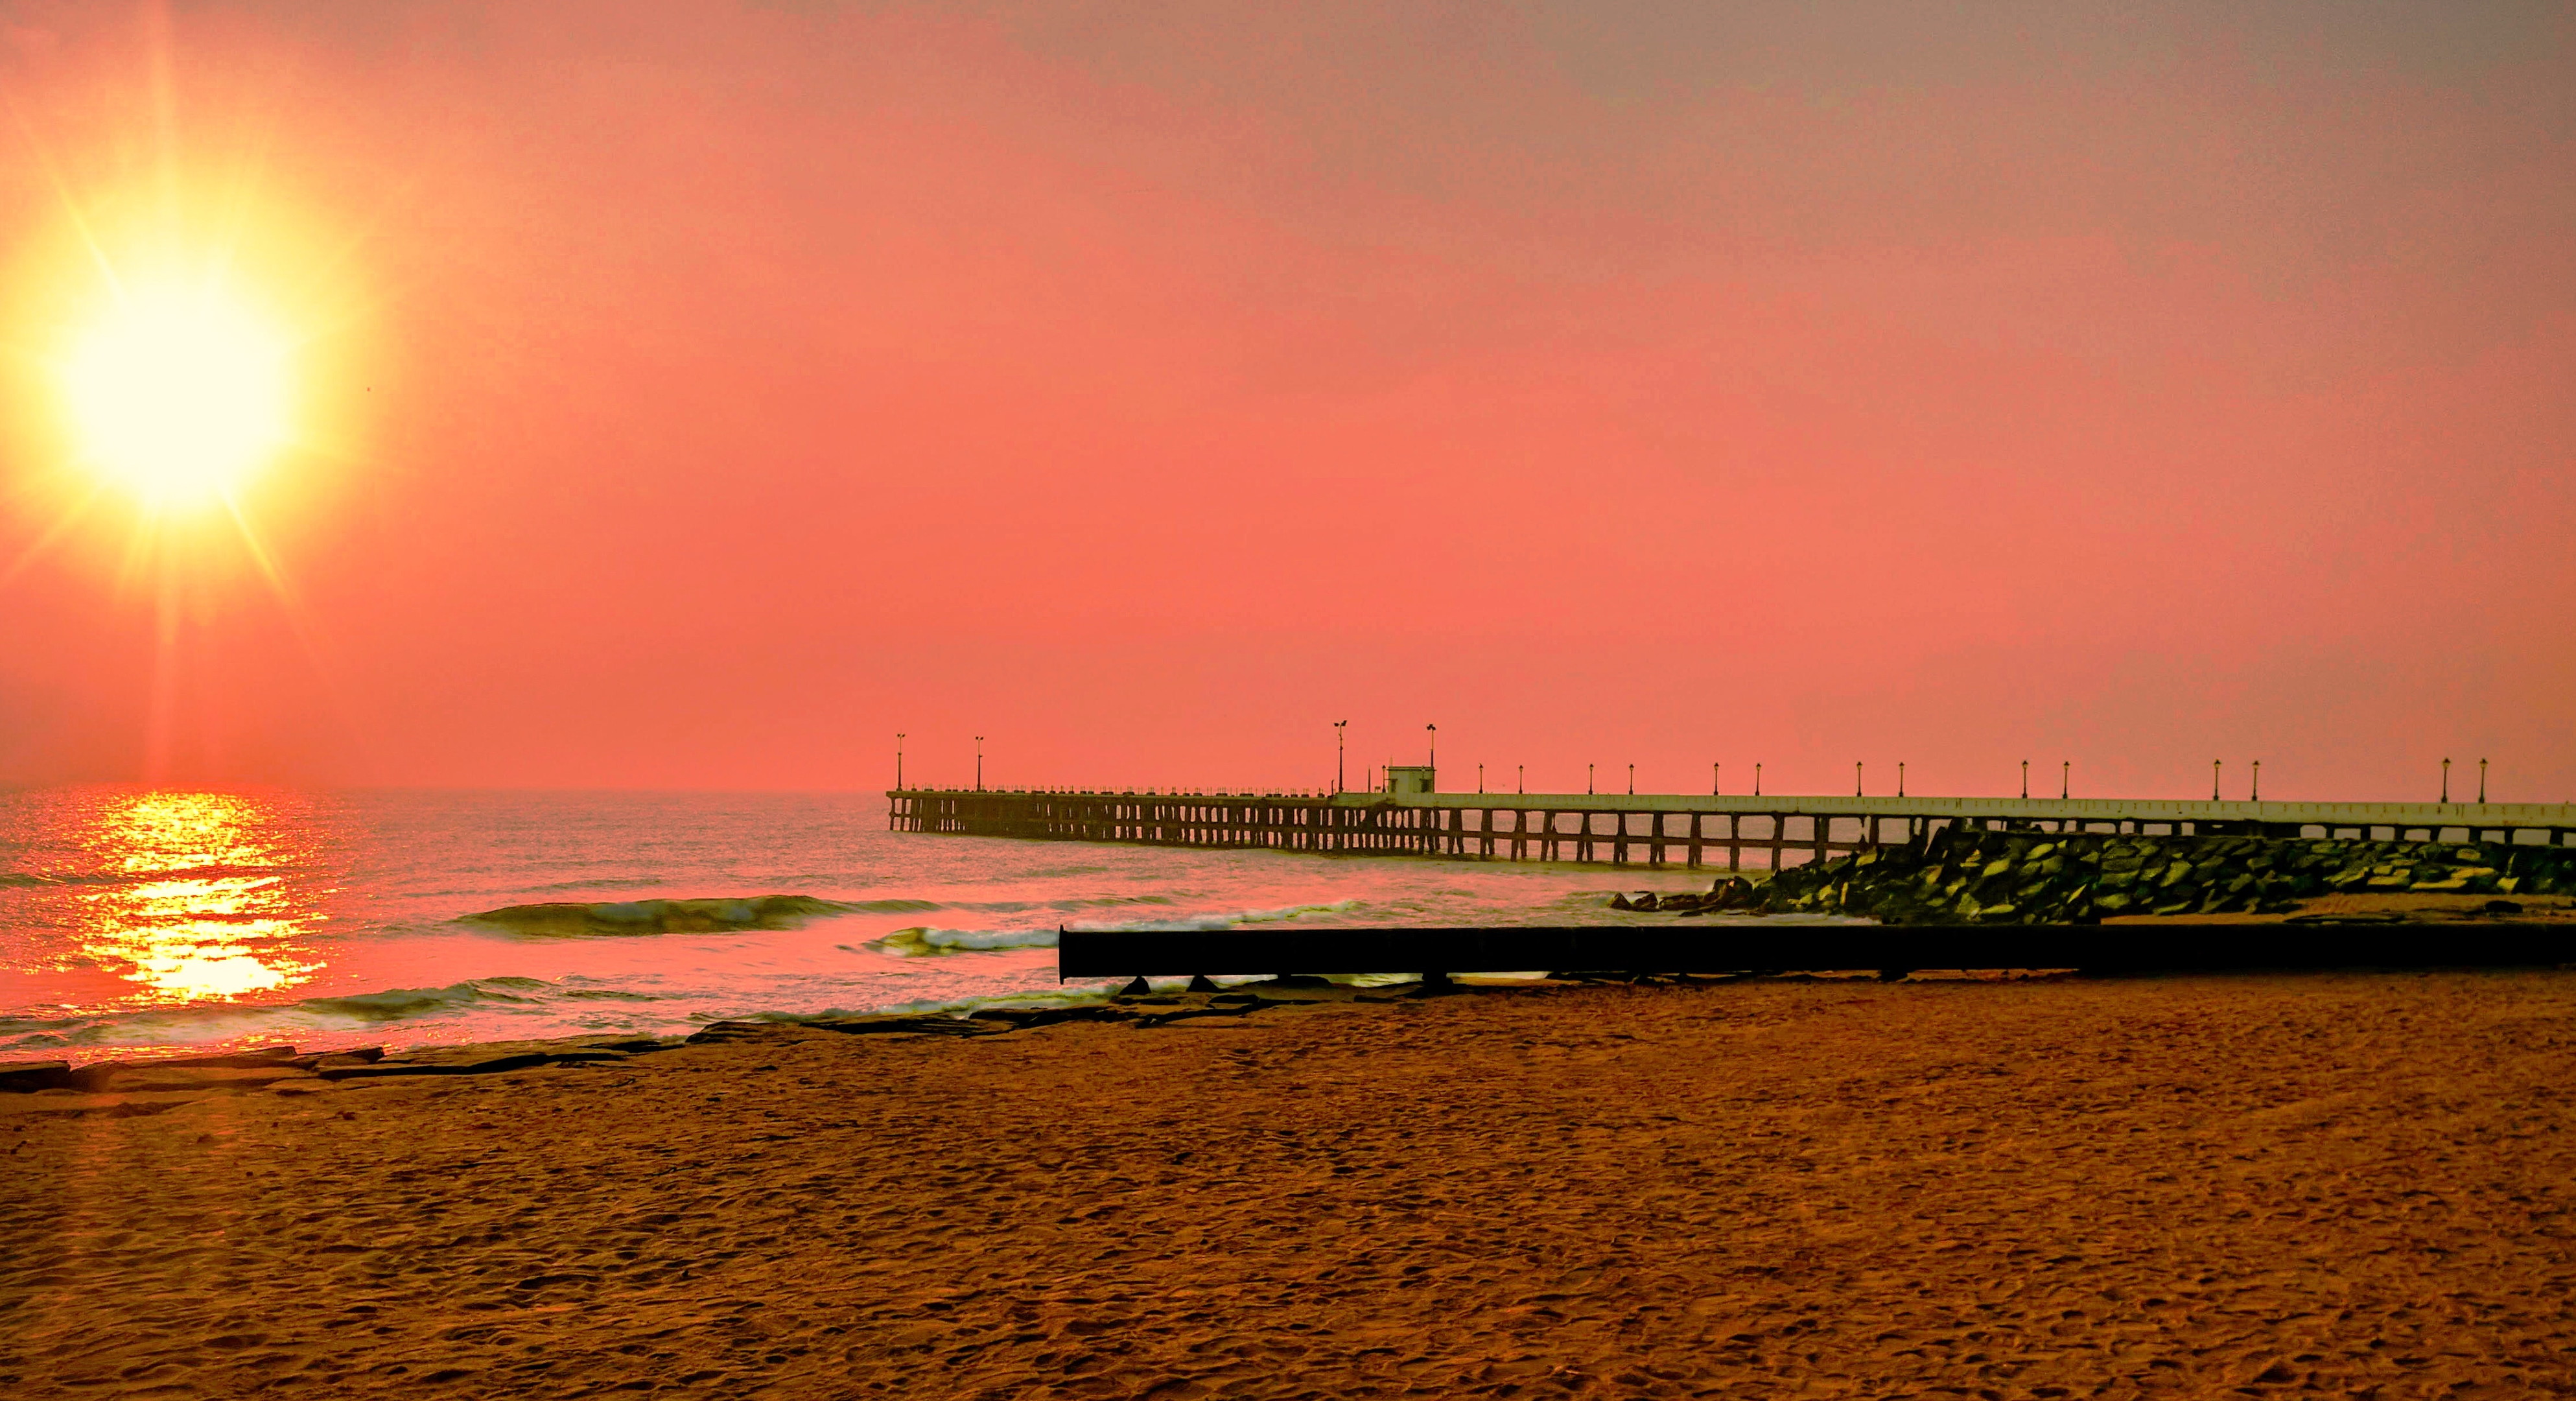 Sunrise at Promenade beach with the view of old pier in Pondicherry